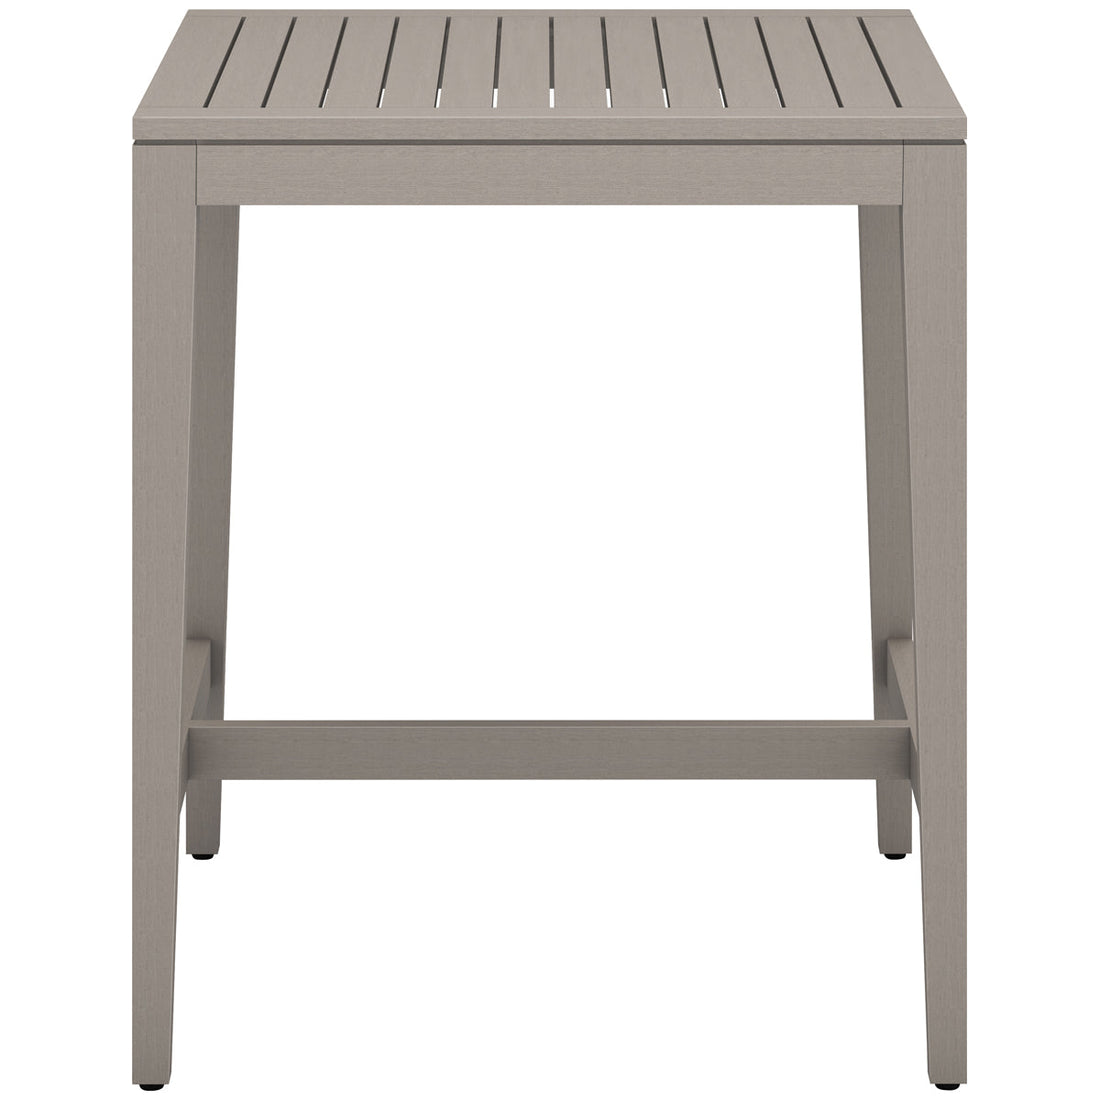 Four Hands Solano Sherwood Outdoor Bar Table